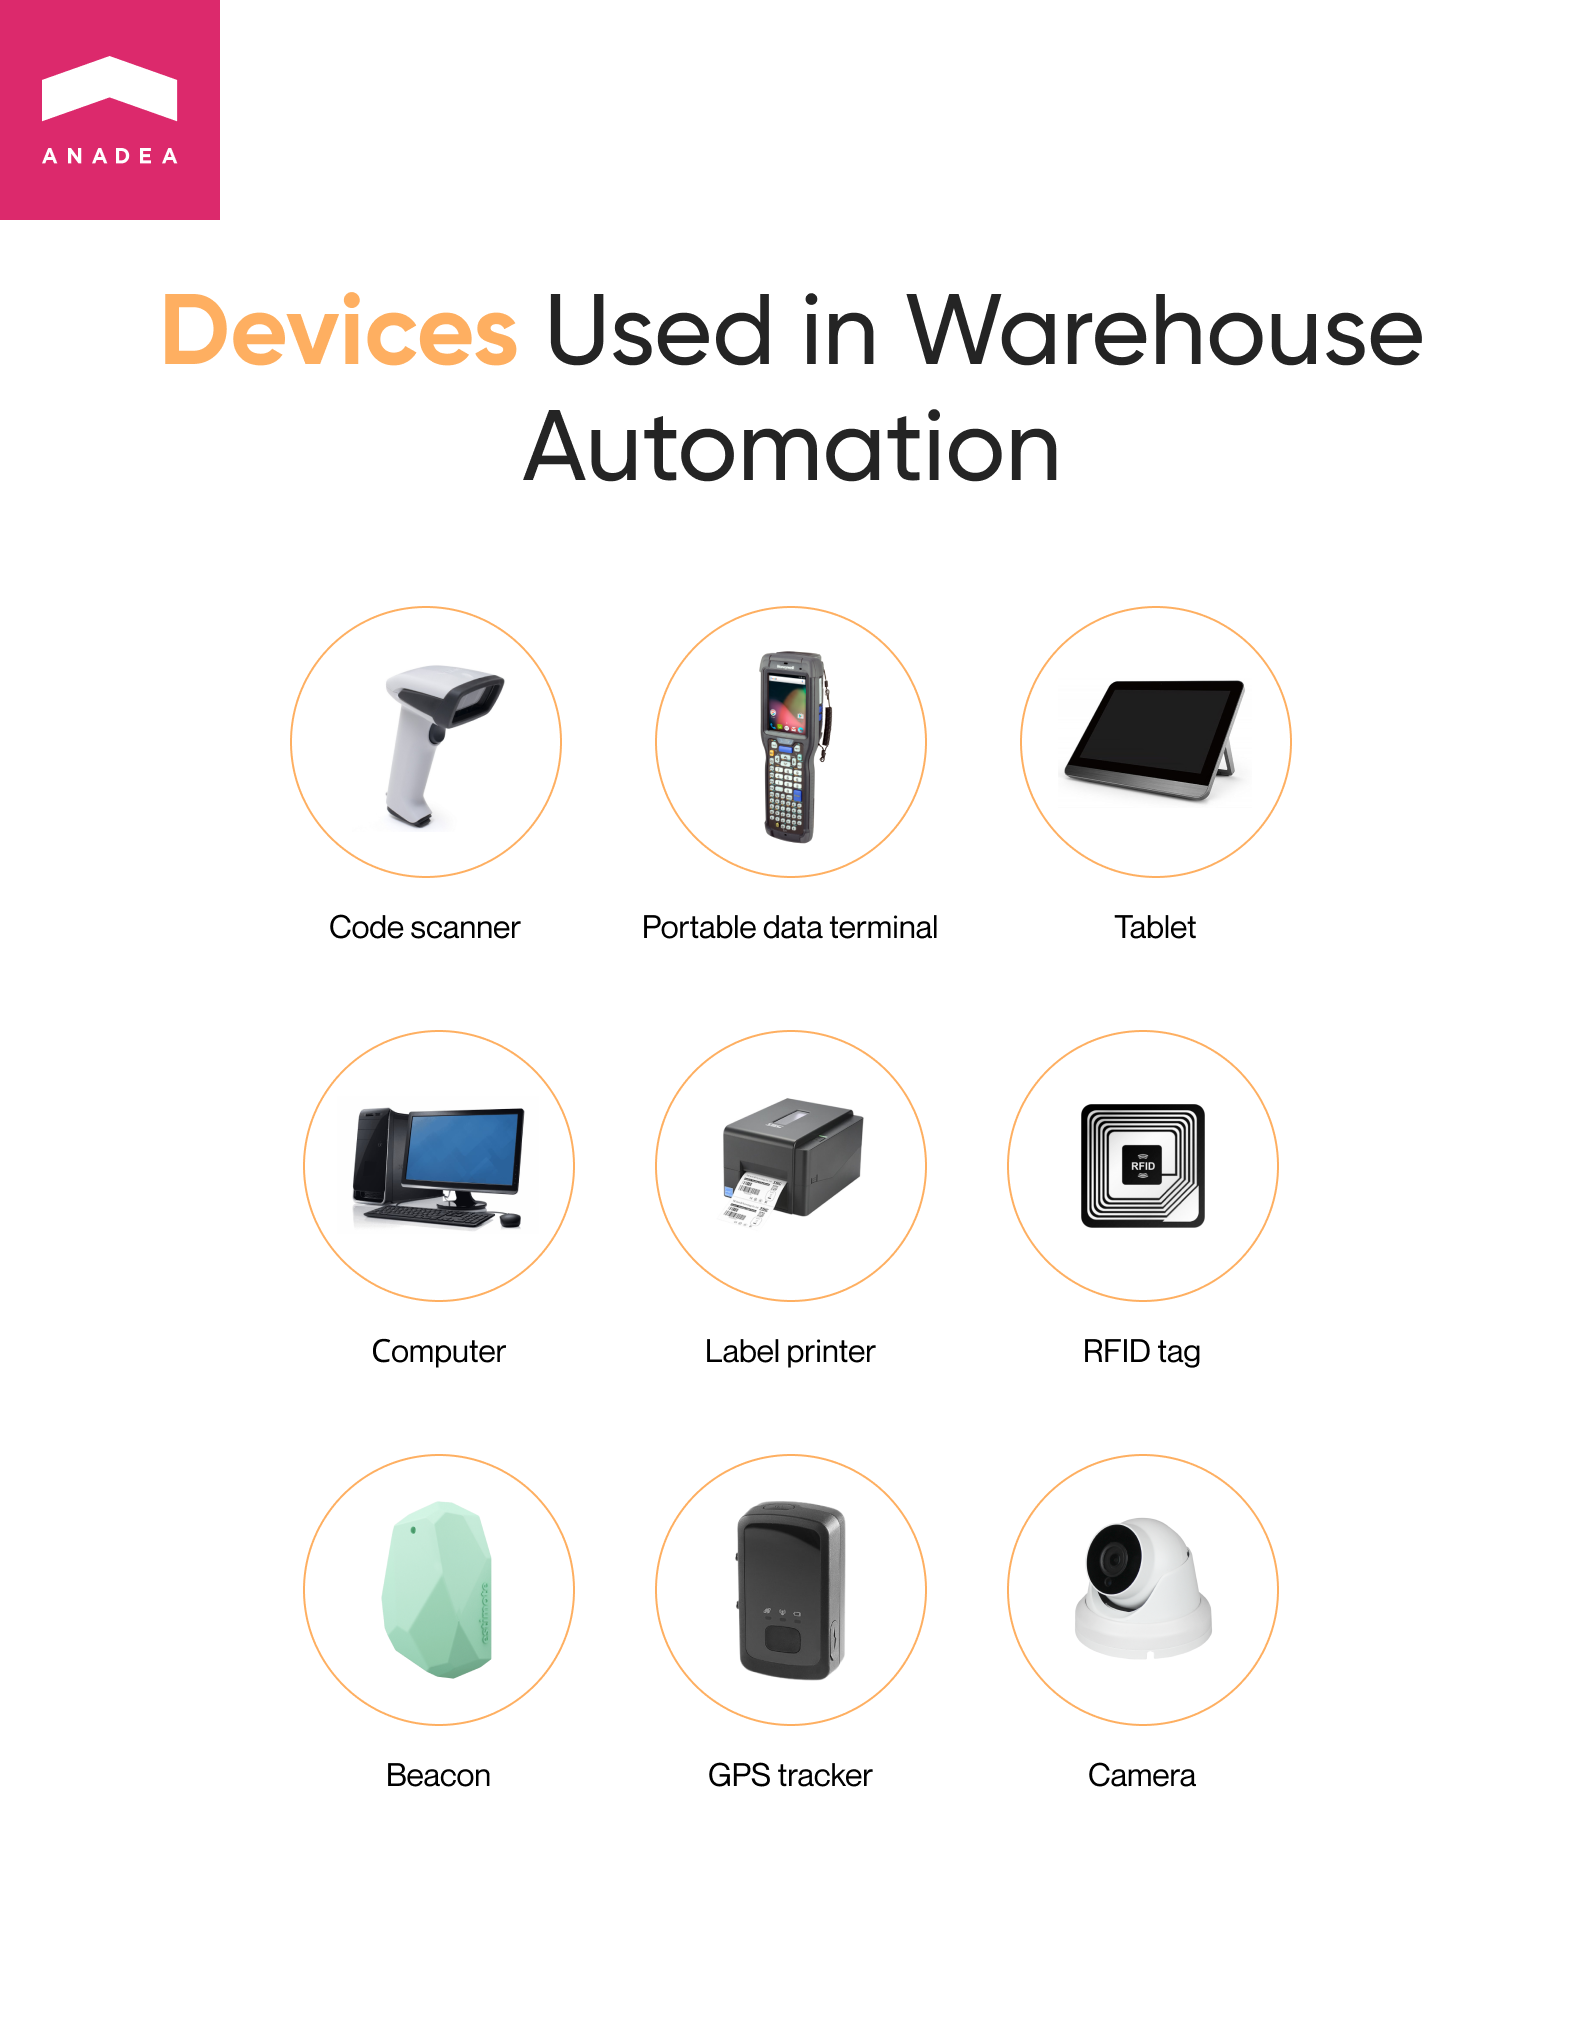 Warehouse automation devices